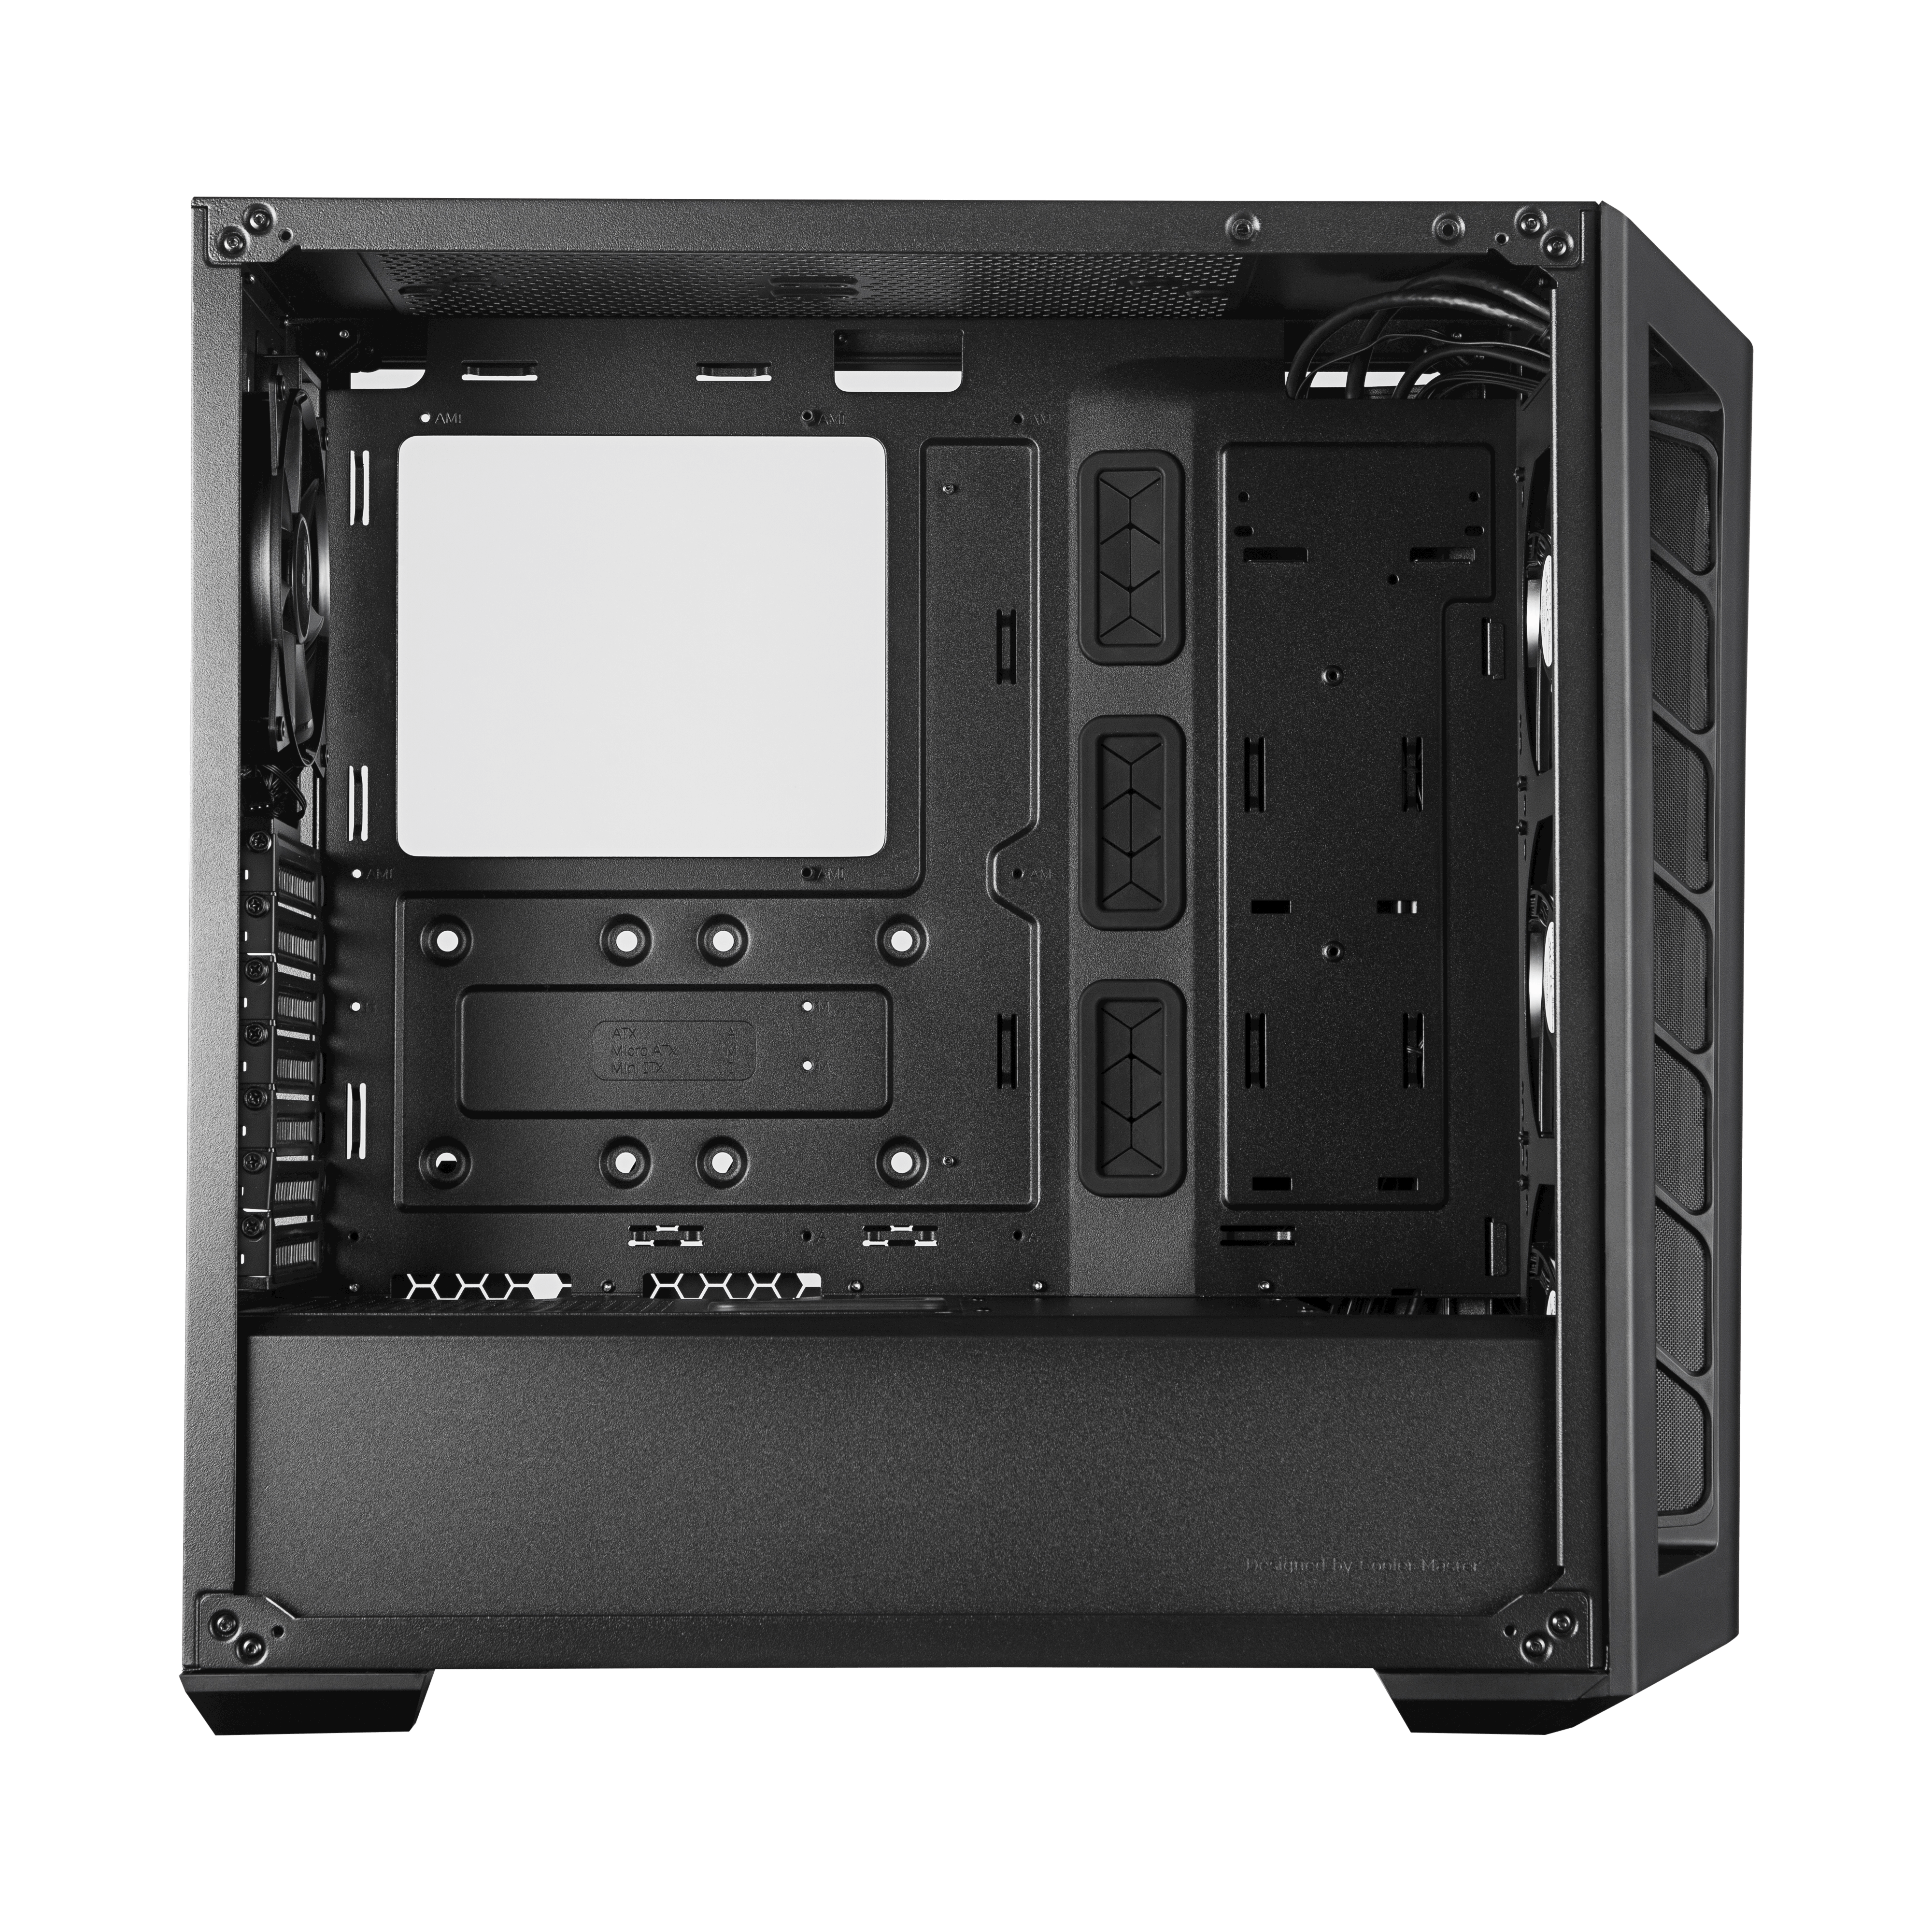 Cooler Master MasterBox MB530P Mid-Tower Case